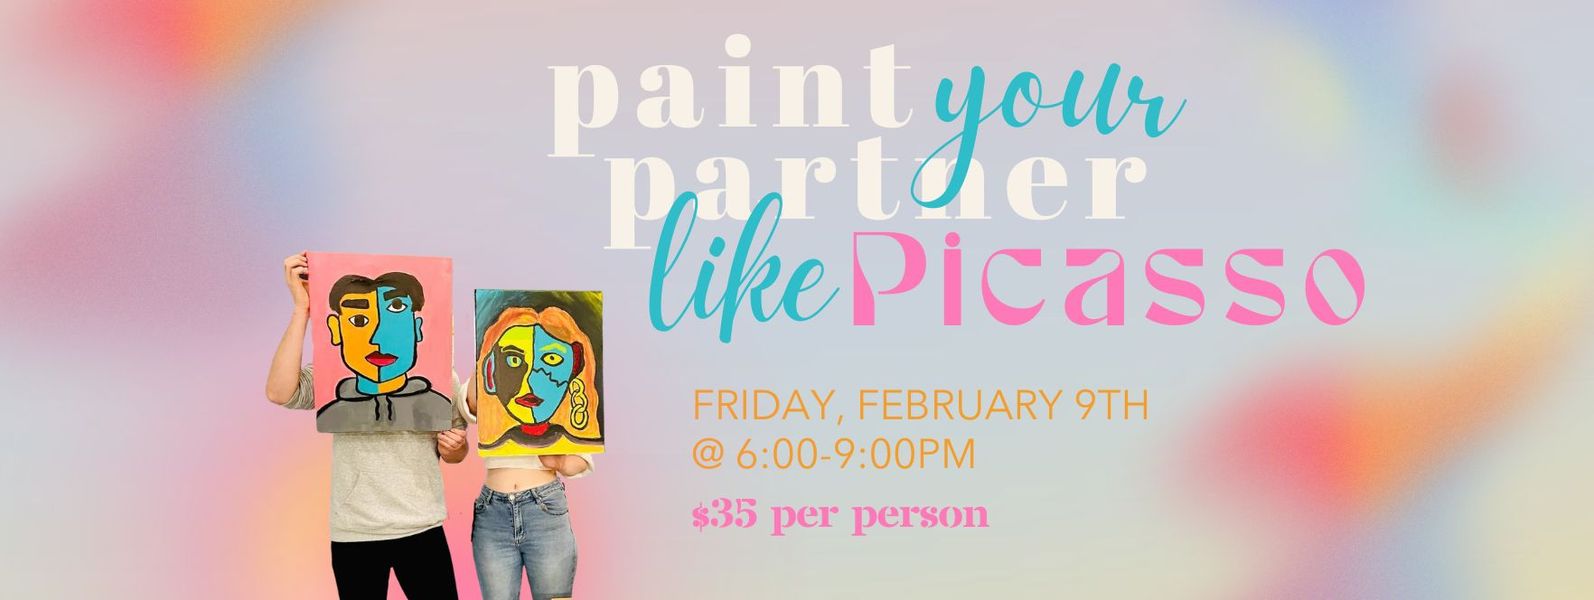 Paint your partner like Picasso at element of art studio gallery this valentines day date night painting workshop